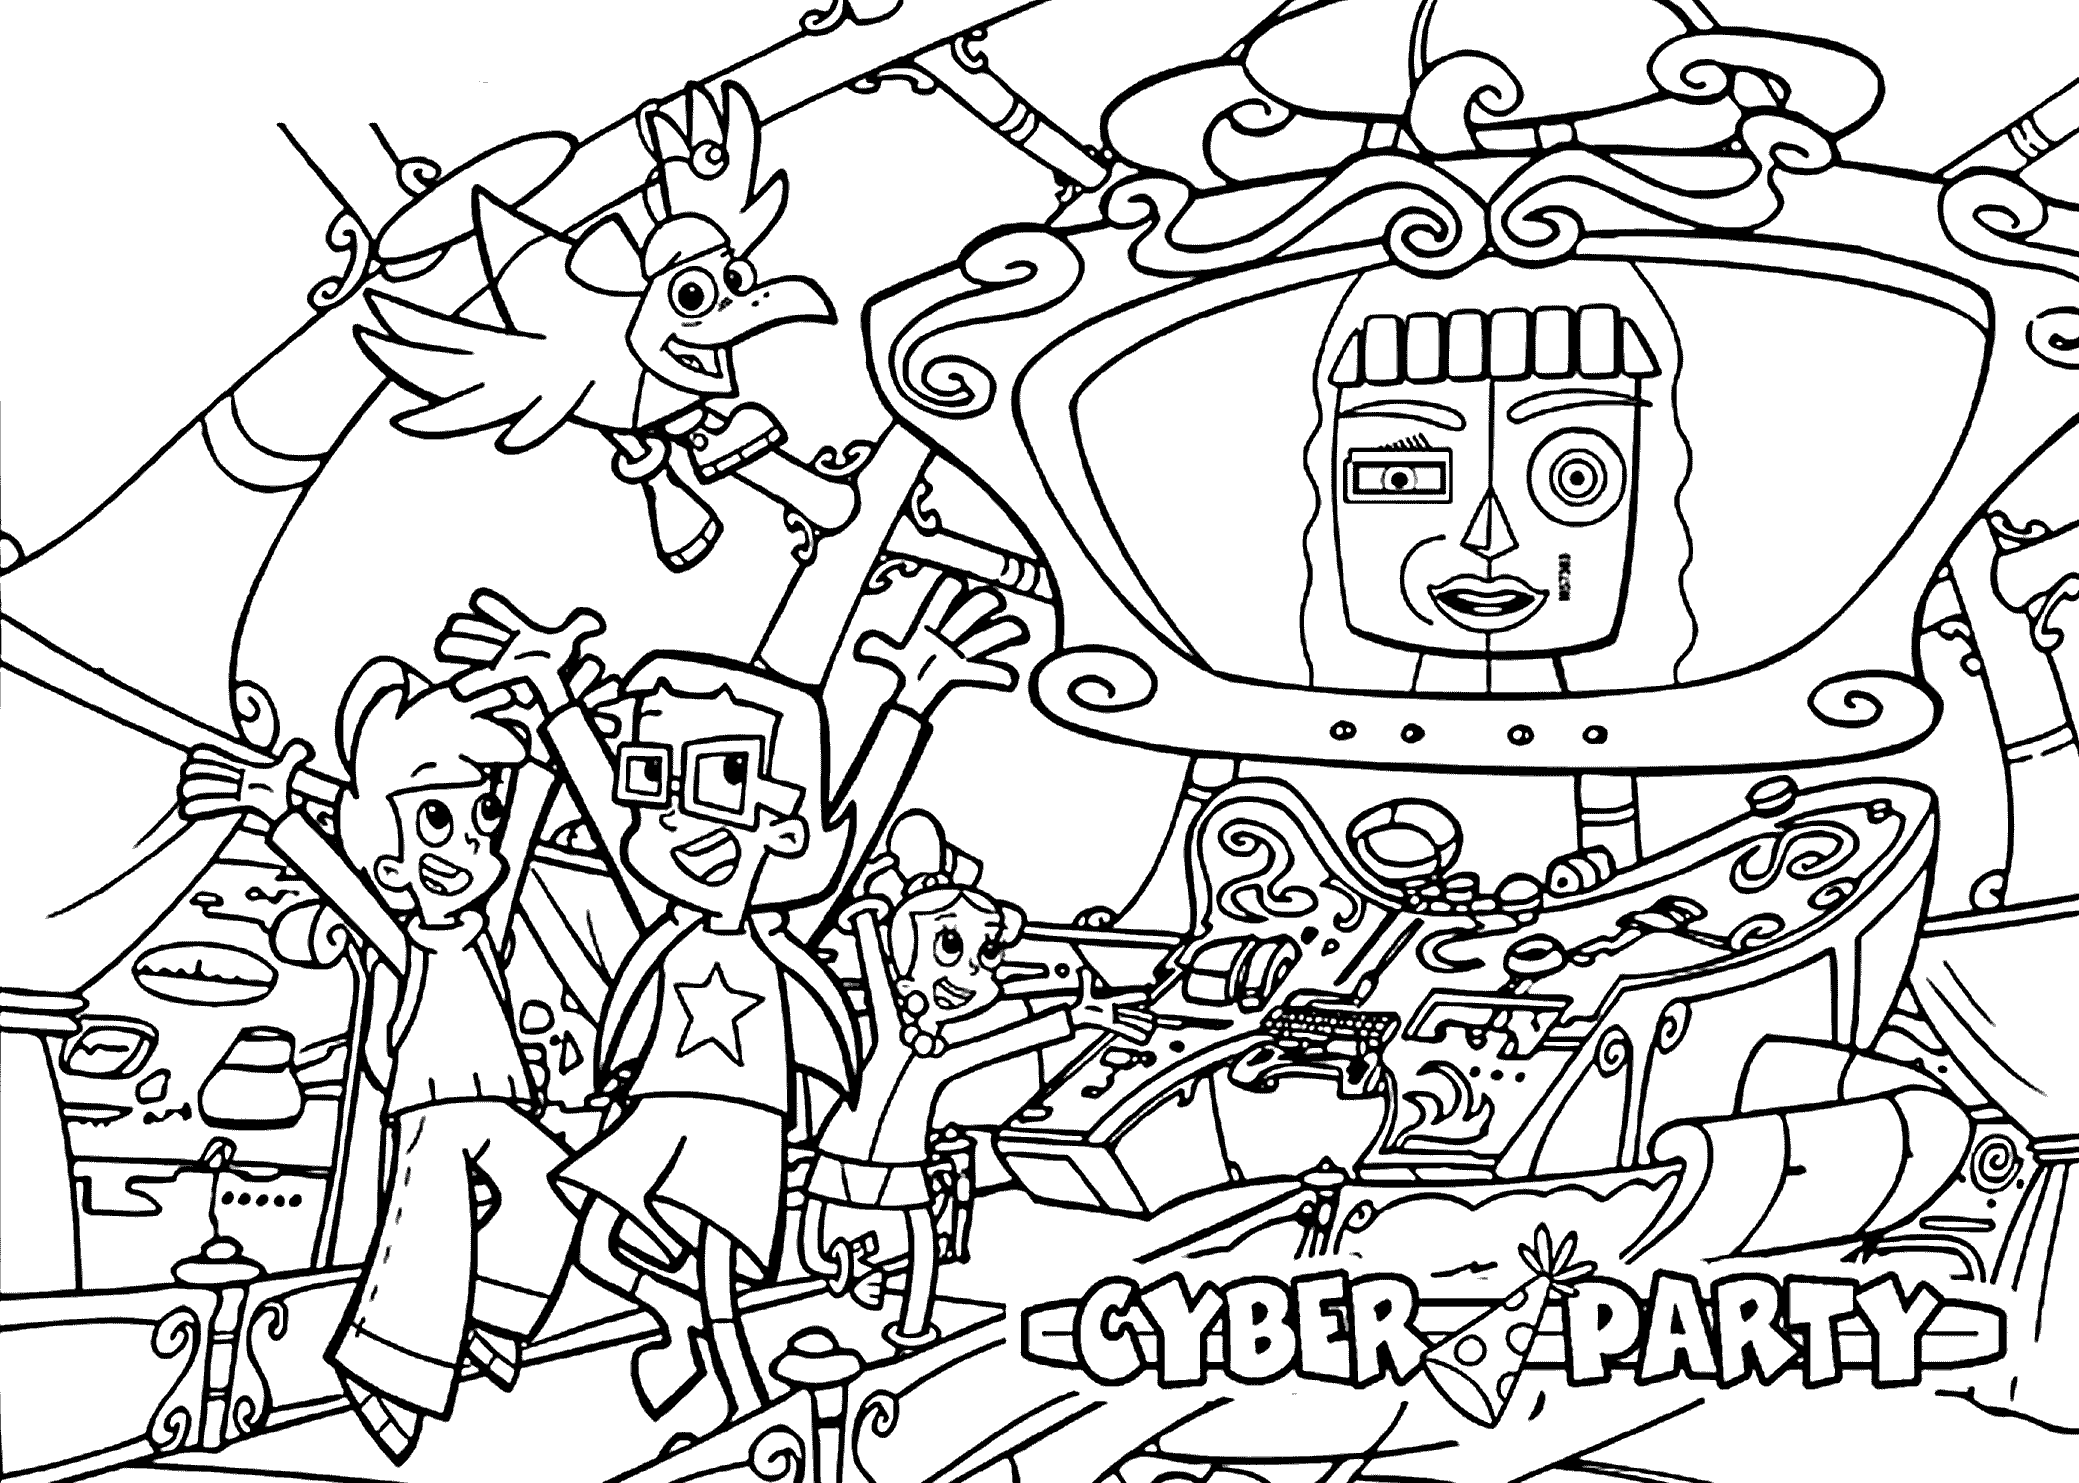 Cyber Party Cyberchase Coloring Pages